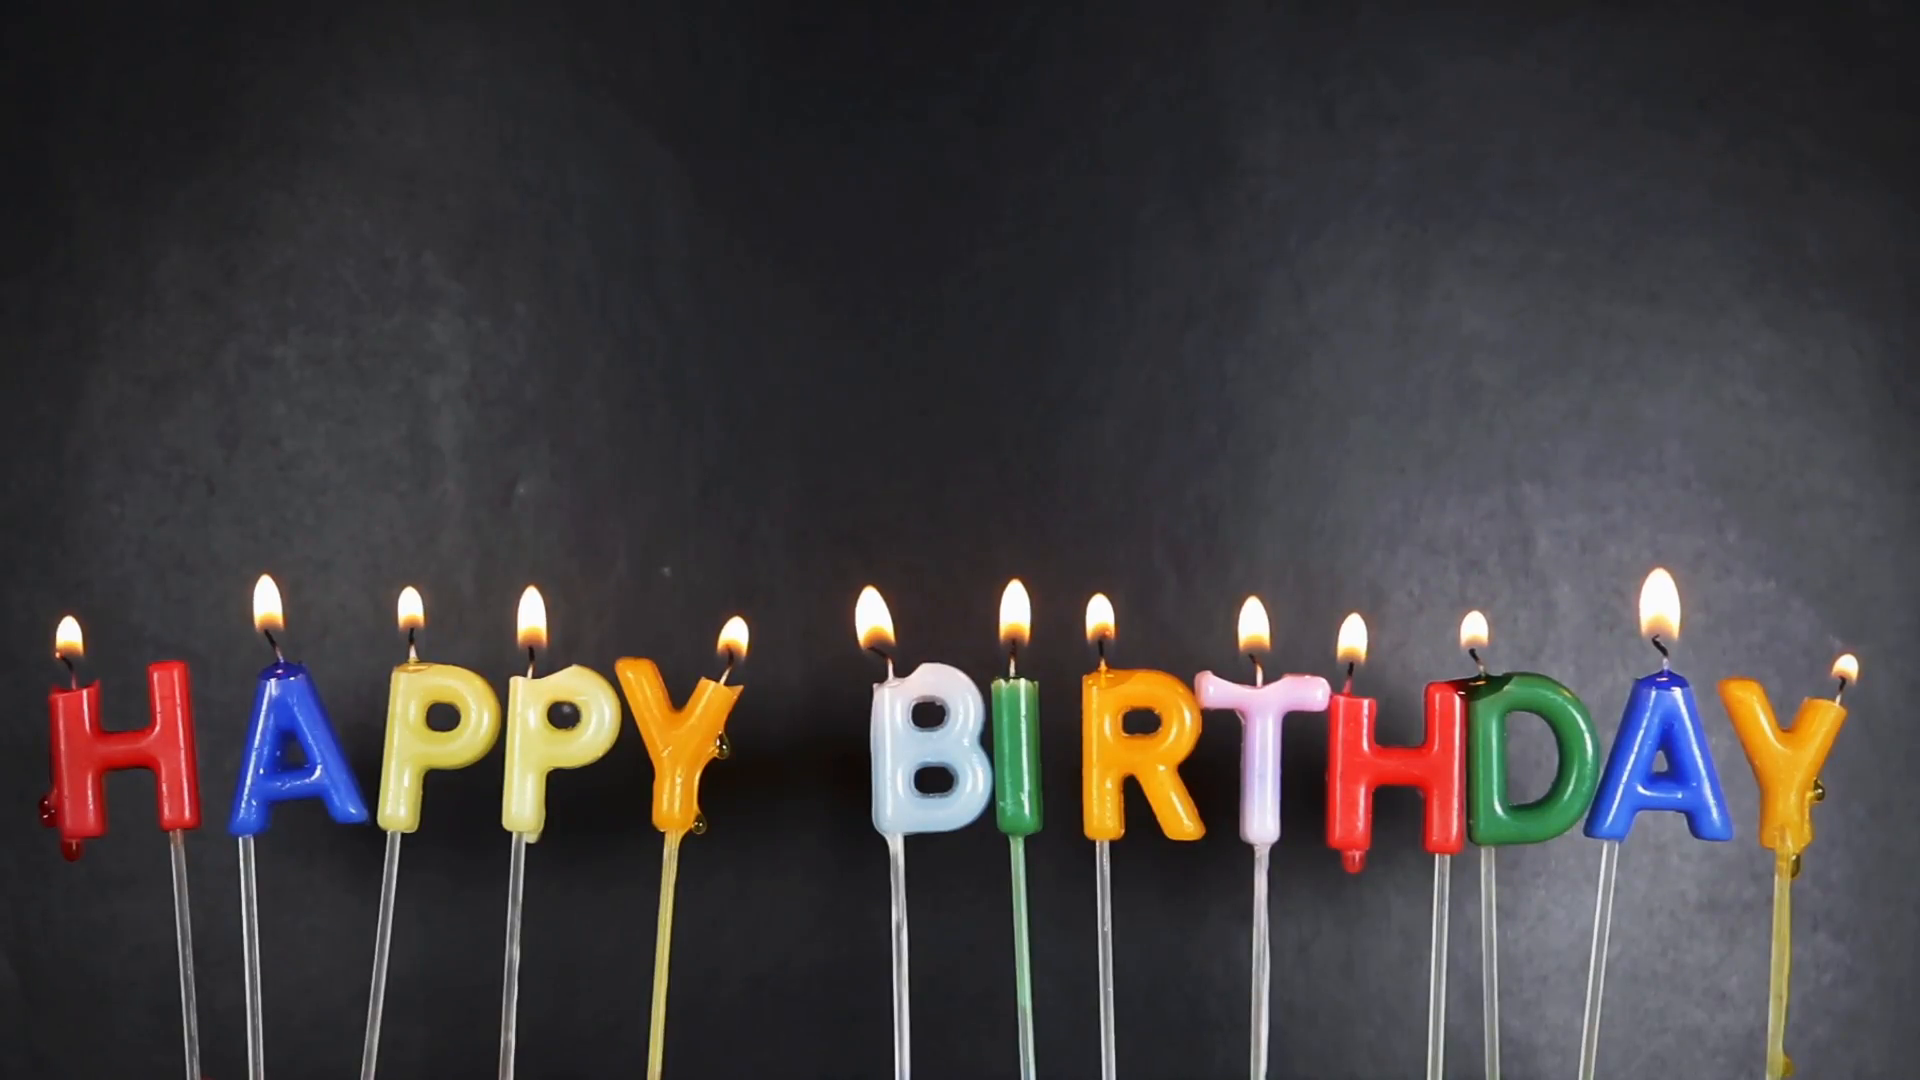 Free photo: Birthday candles - Birthday, Shot, Object - Free Download ...